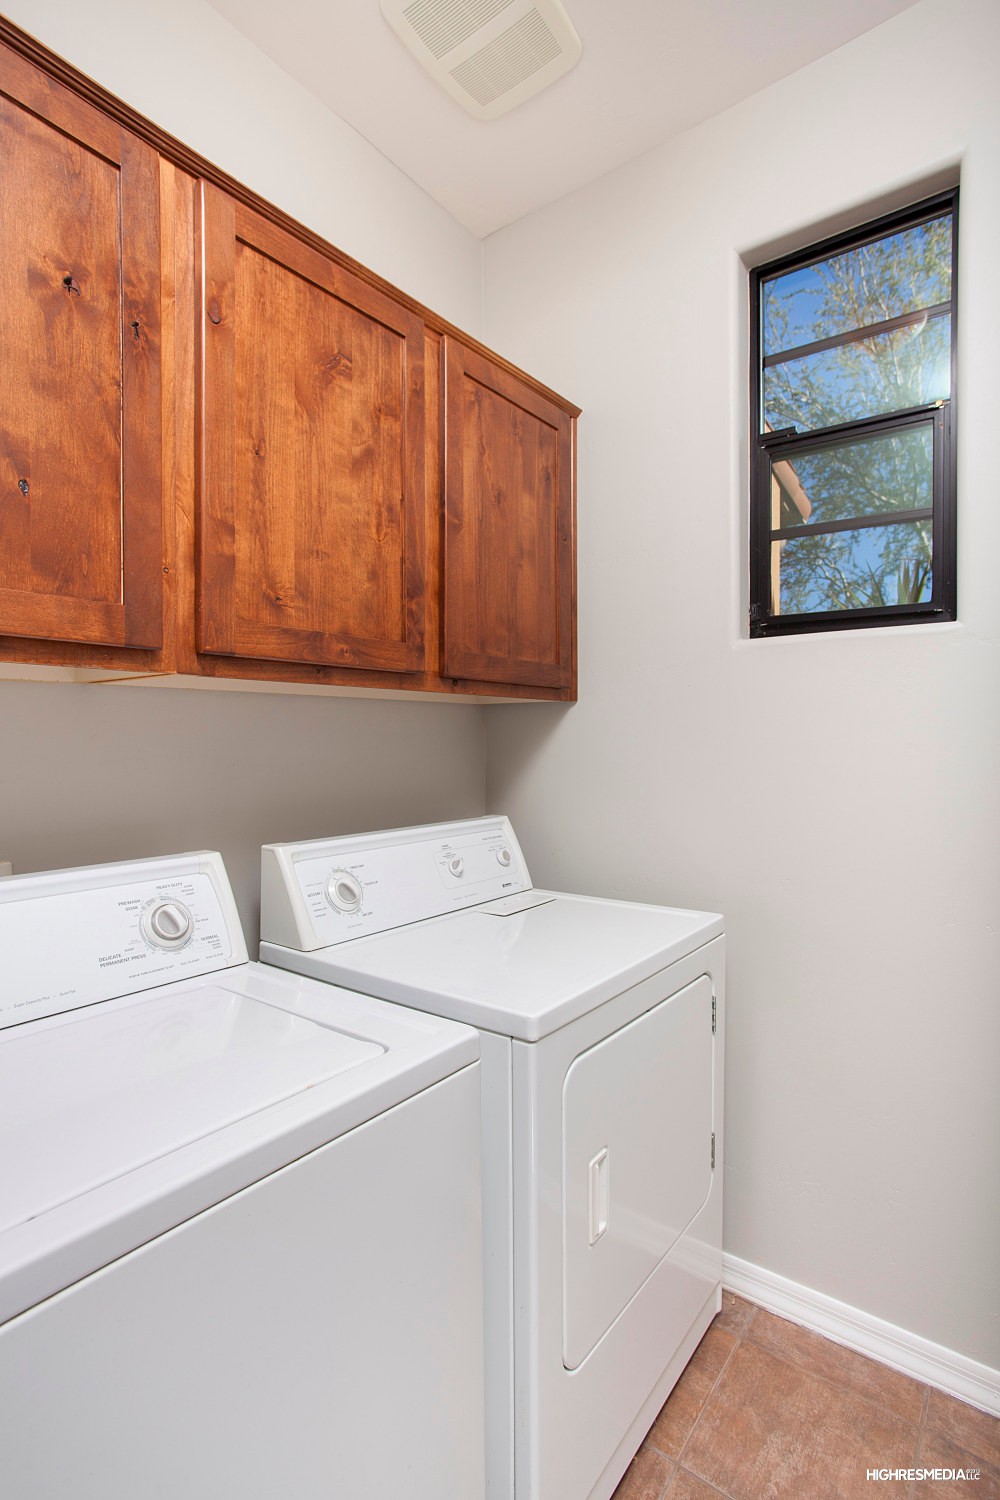 In-Unit Laundry at this Scottsdale townhome for sale in Market Street at DC Ranch located at 20704 N 90th Pl #1005 Scottsdale, AZ 85255 listed by Don Matheson at The Matheson Team